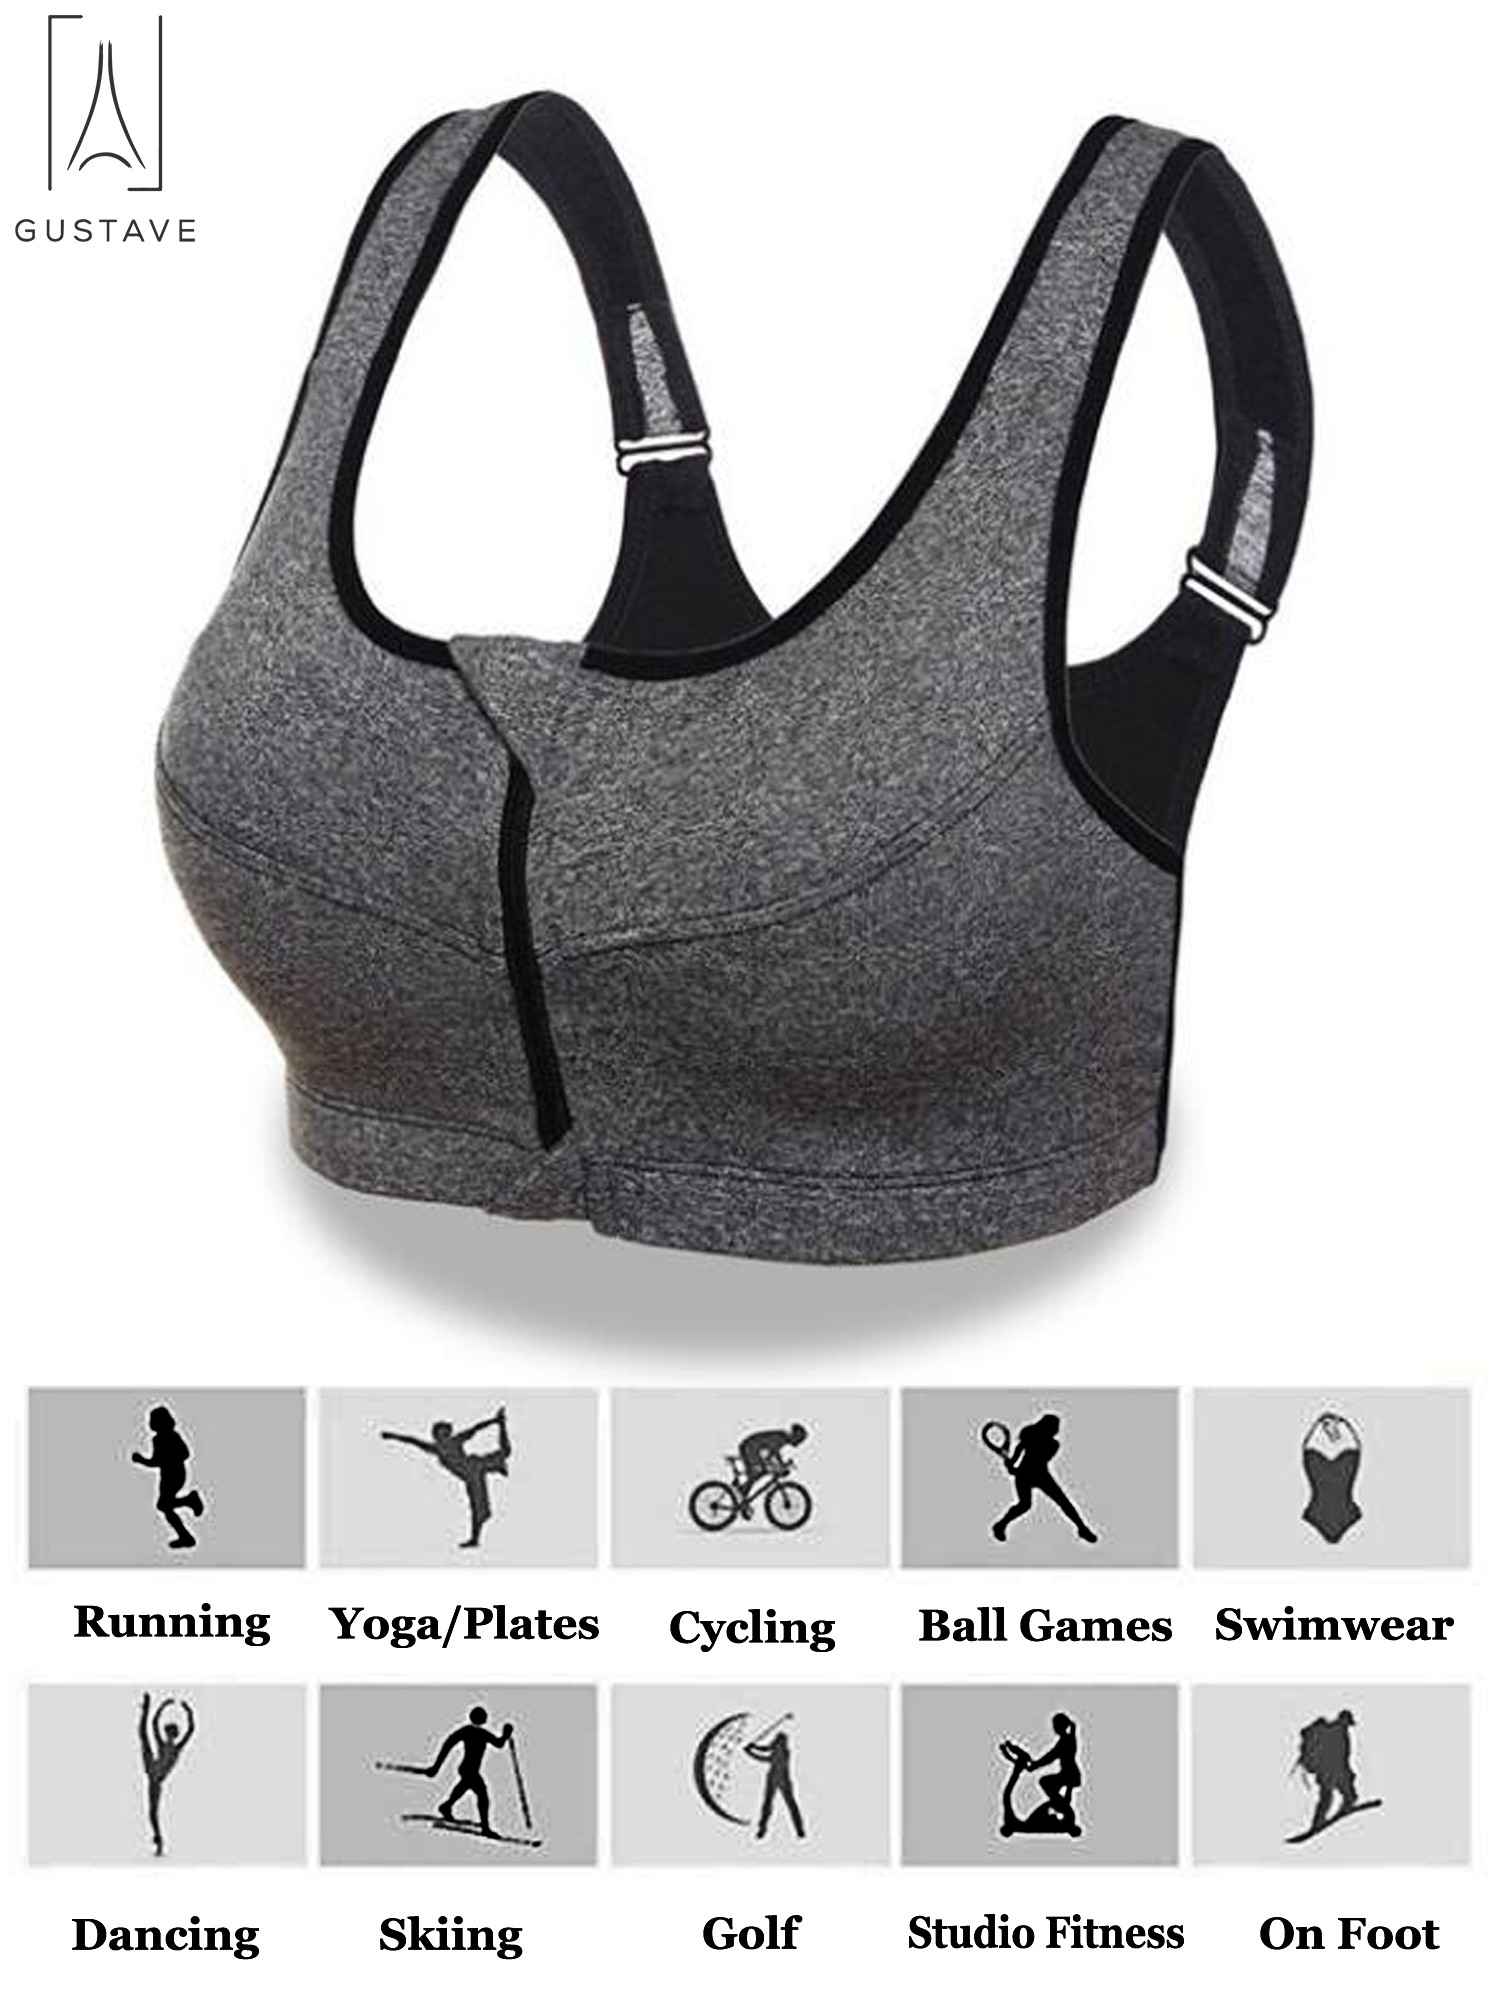 Gustave Women High Impact Front Zip Sports Bra Push Up Padded Workout Yoga Bras Wirefree Shockproof Fitness Vest Tops "Gray,L" - image 2 of 10